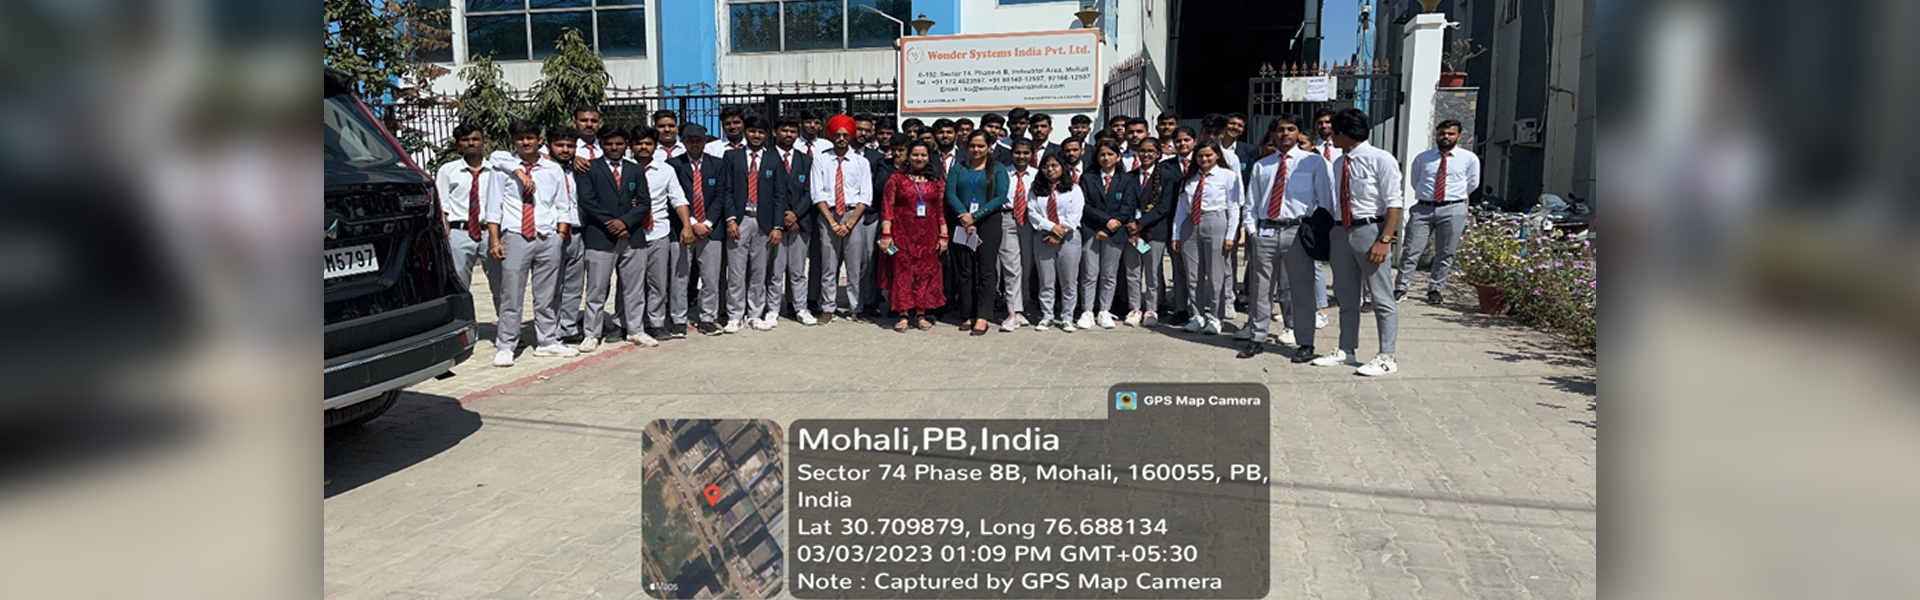 Industrial Visit to Wonder Automation Training Division Mohali 